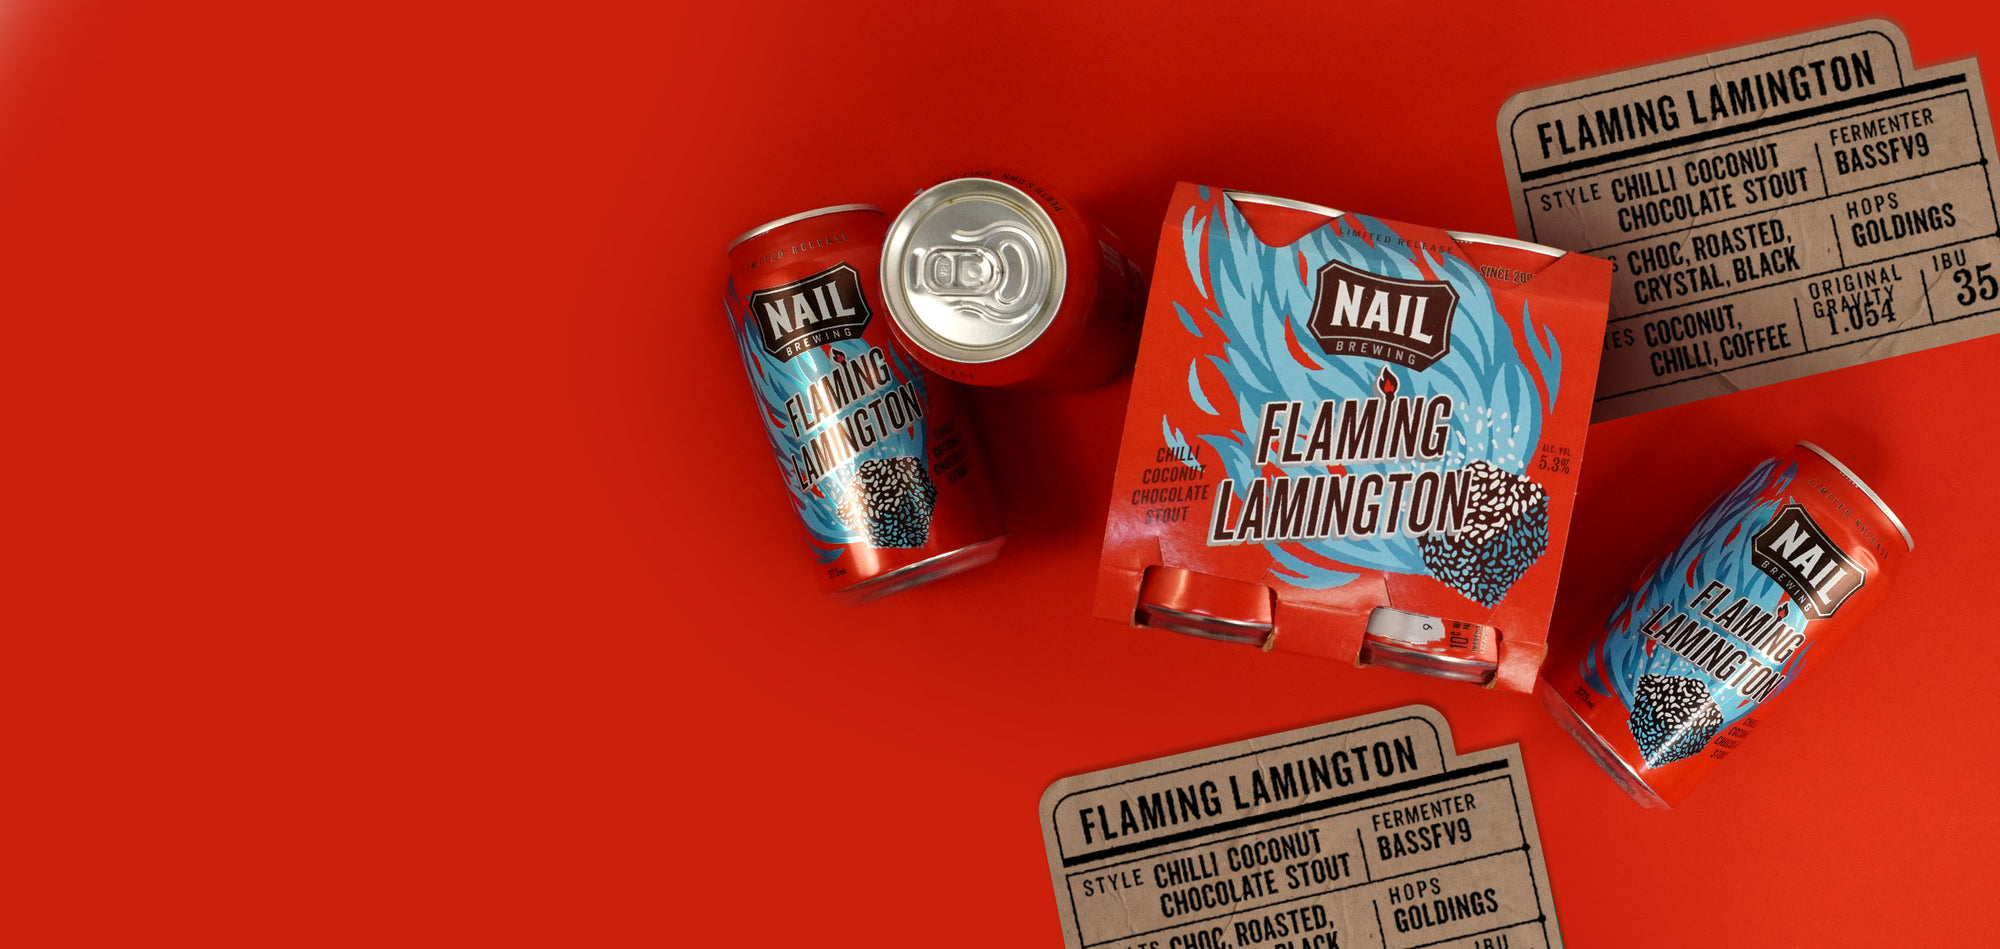 Nail Flaming Lamington Stout with Chilli, Coconut & Chocolate